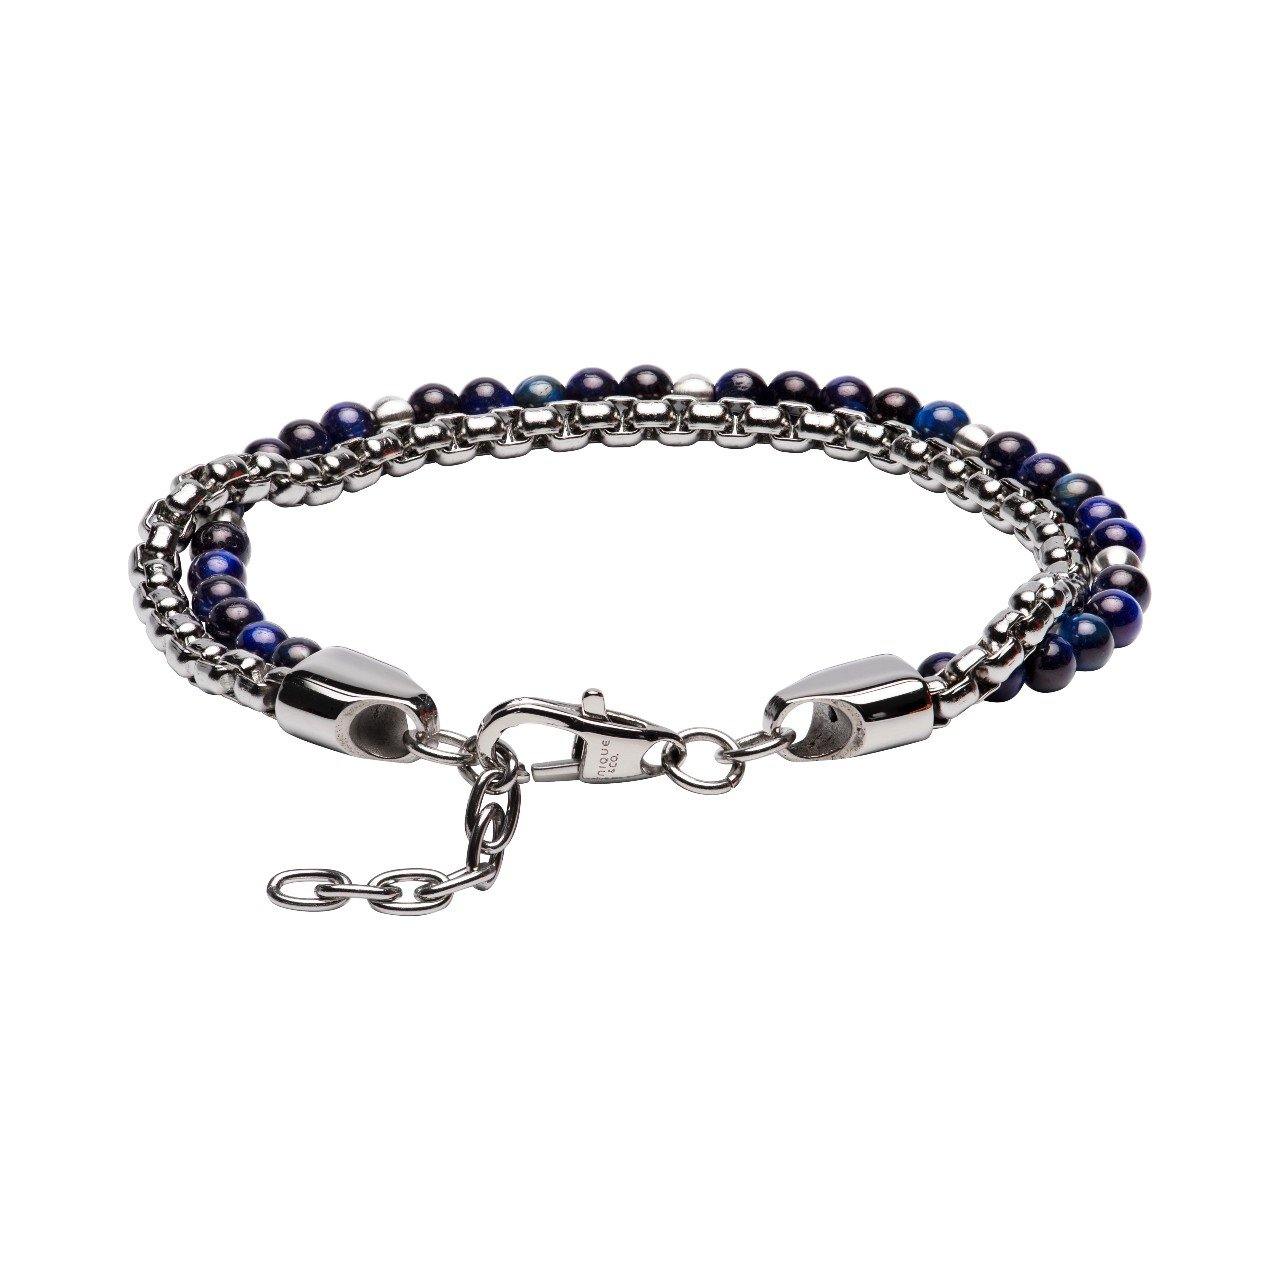 Unique & Co Blue Lapis or Tiger's Eye Beads and Stainless Steel Chain Bracelet - Rococo Jewellery